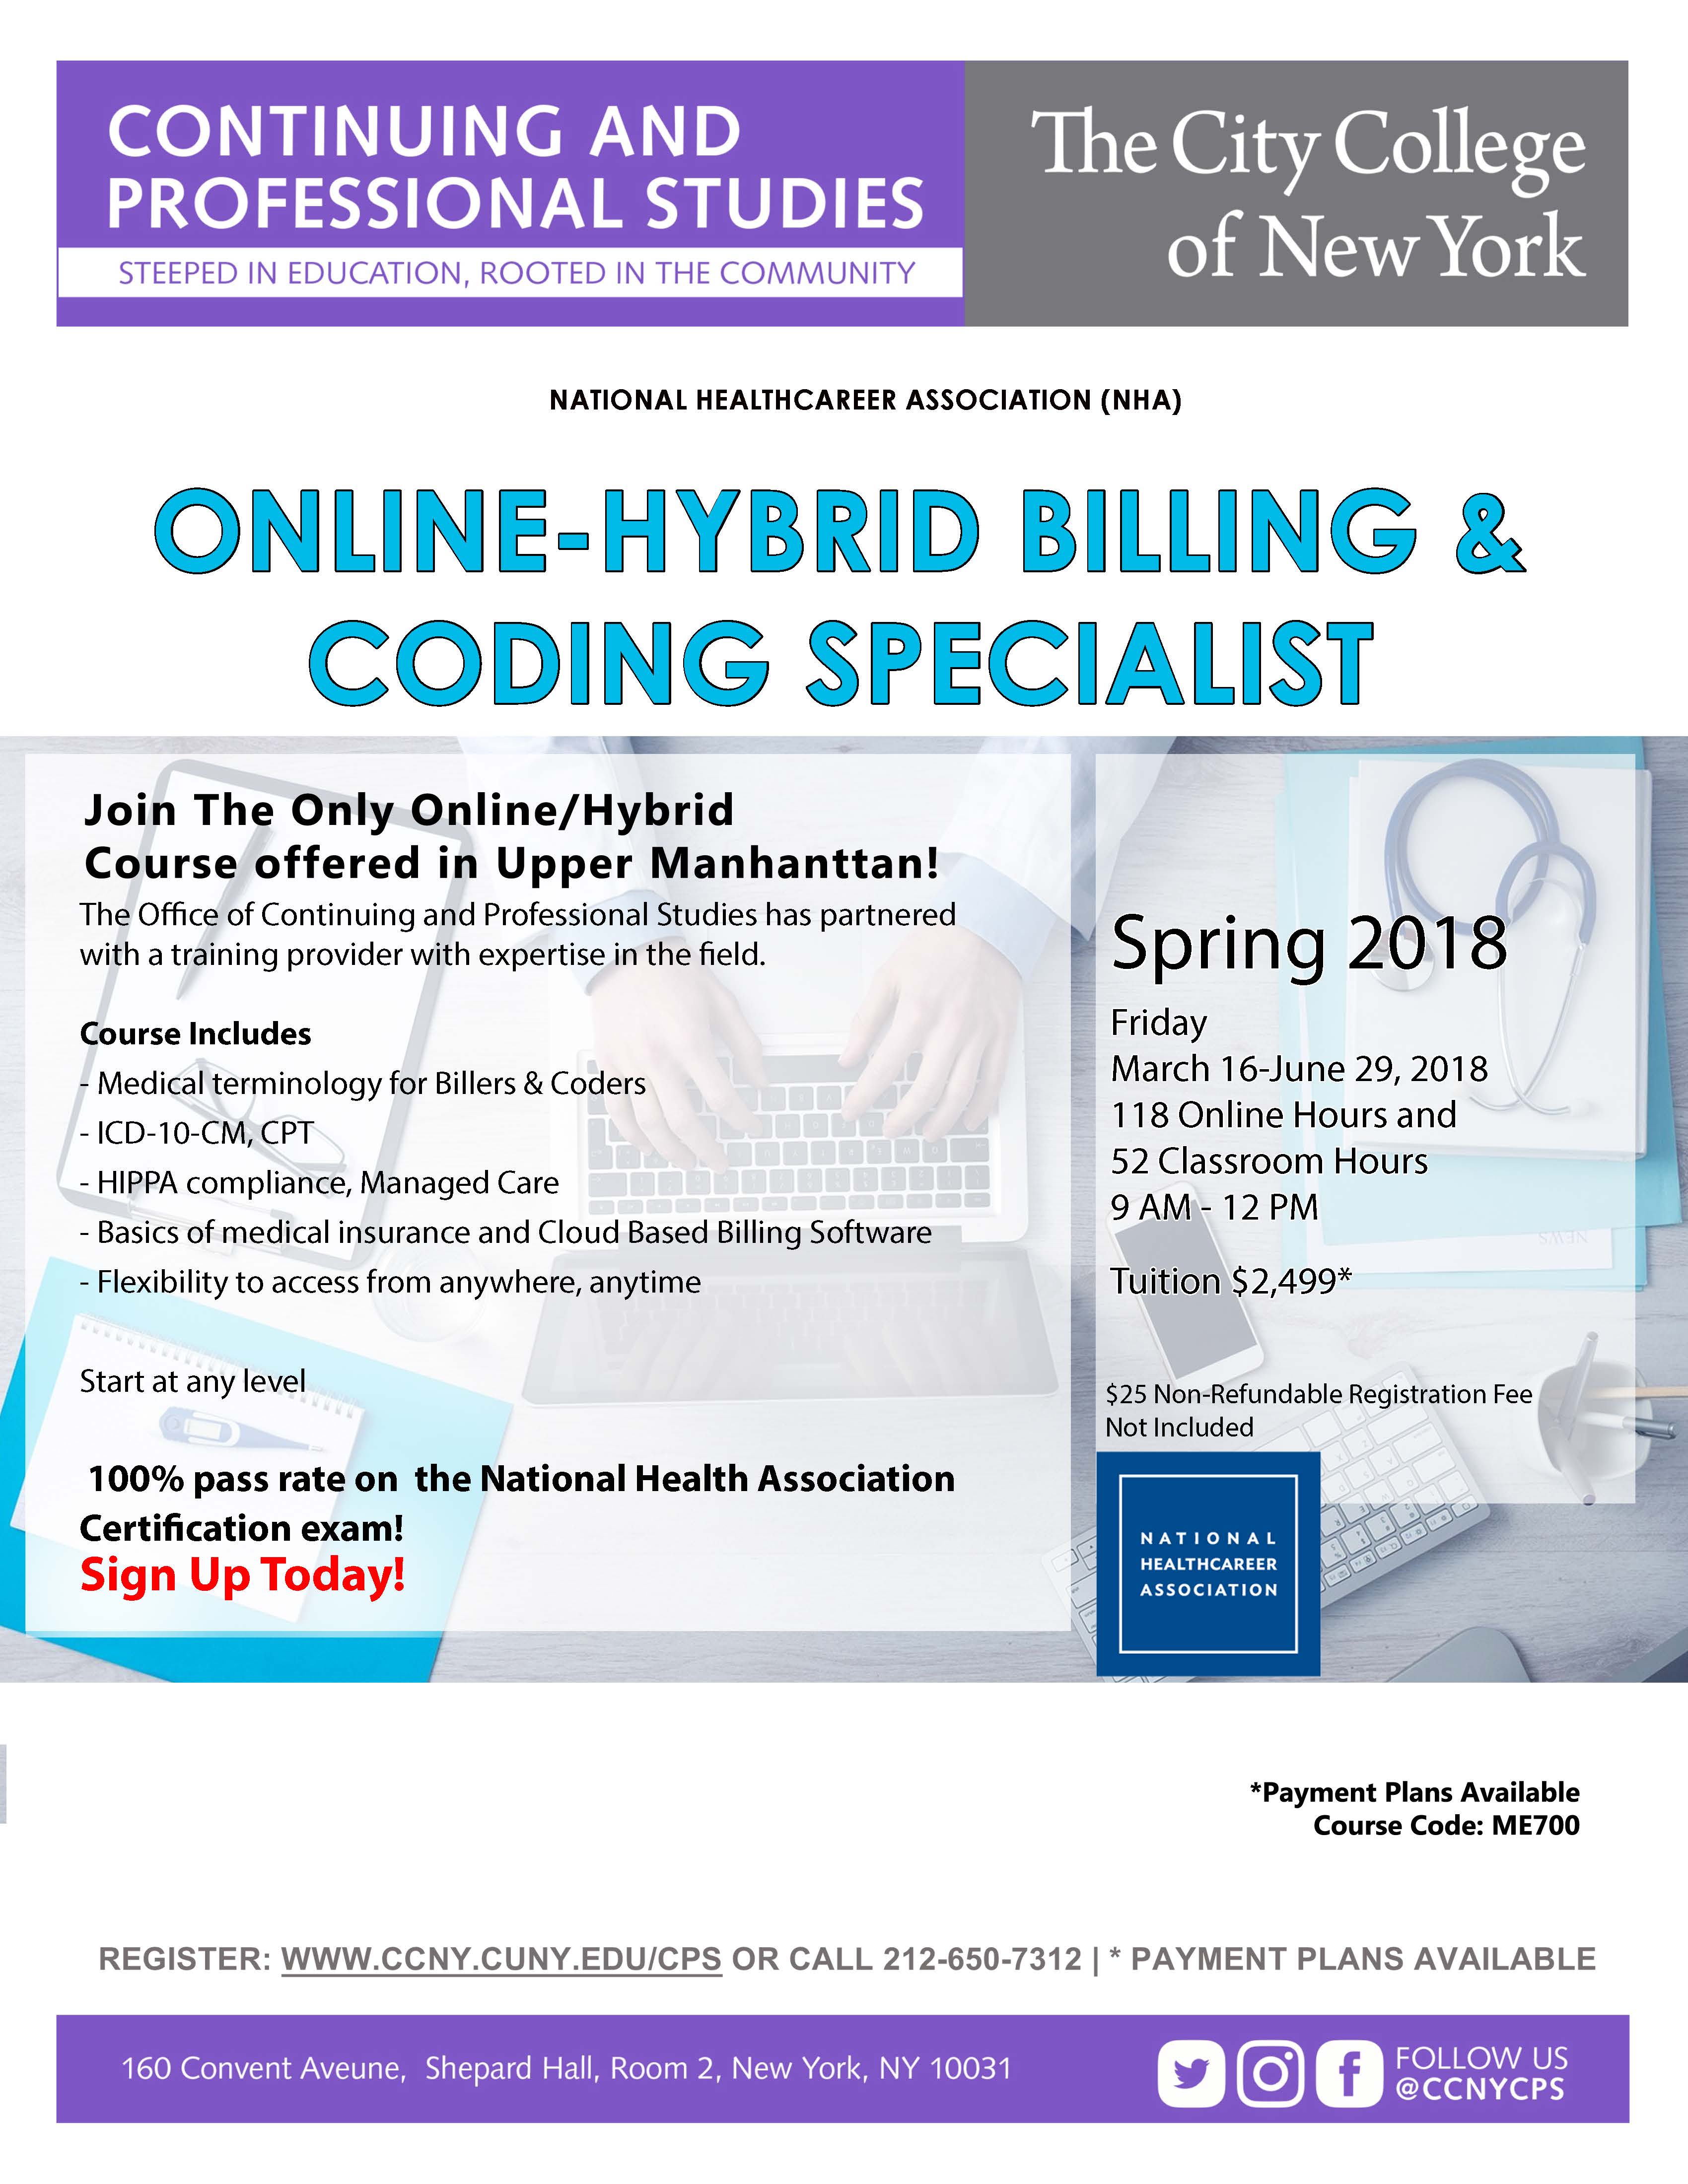 Online/Hybrid Certified Billing Coding Specialist The City College